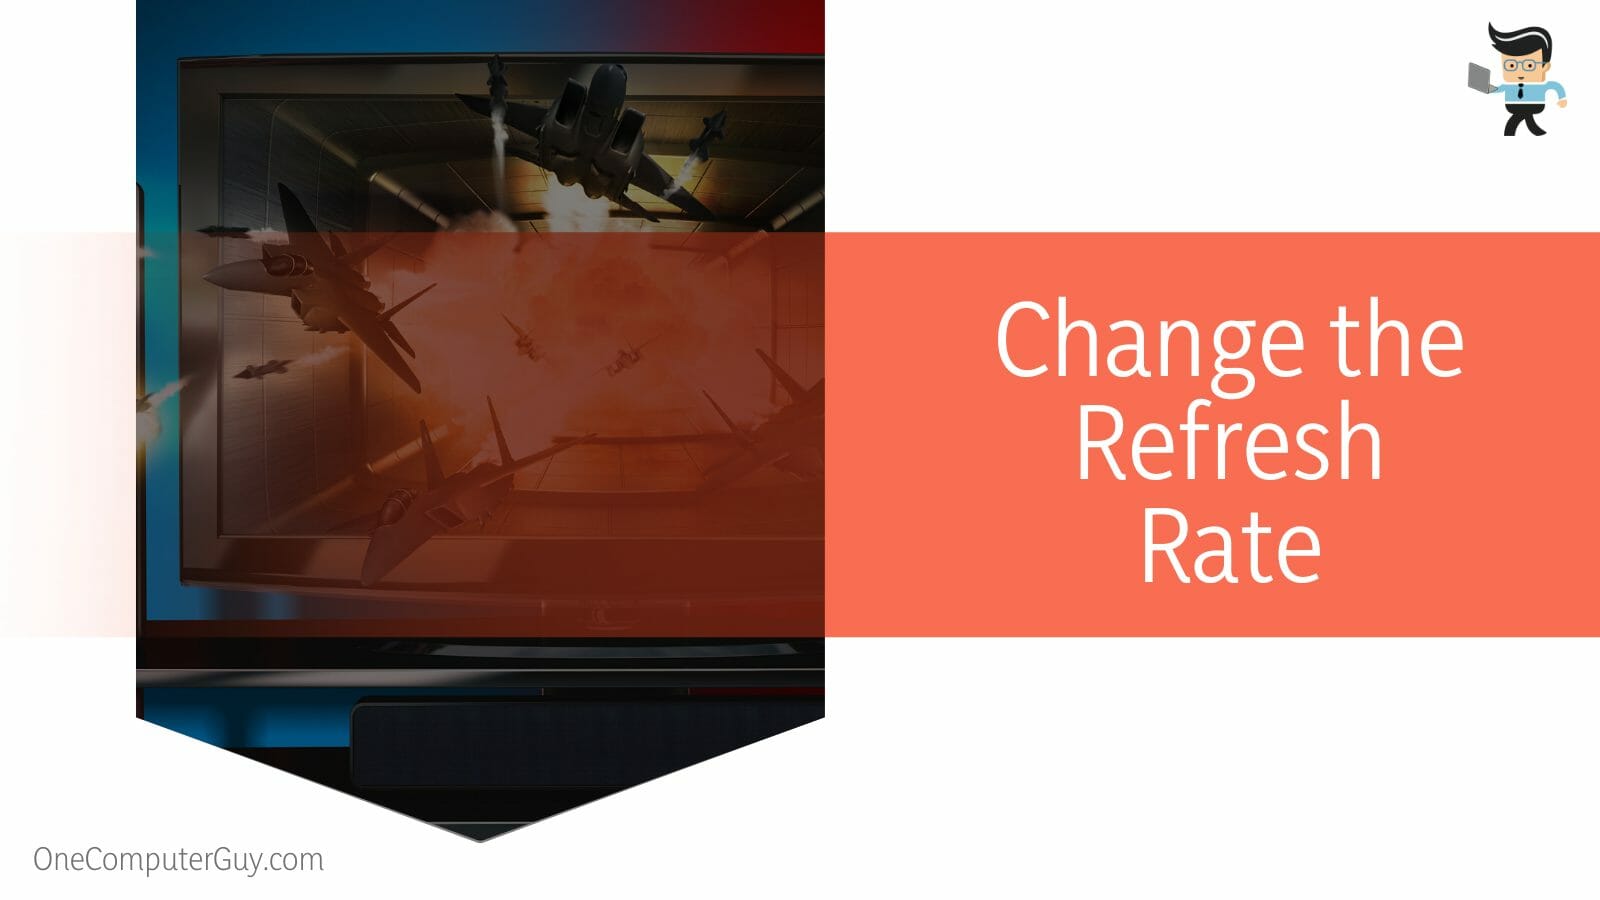 Change the Refresh Rate